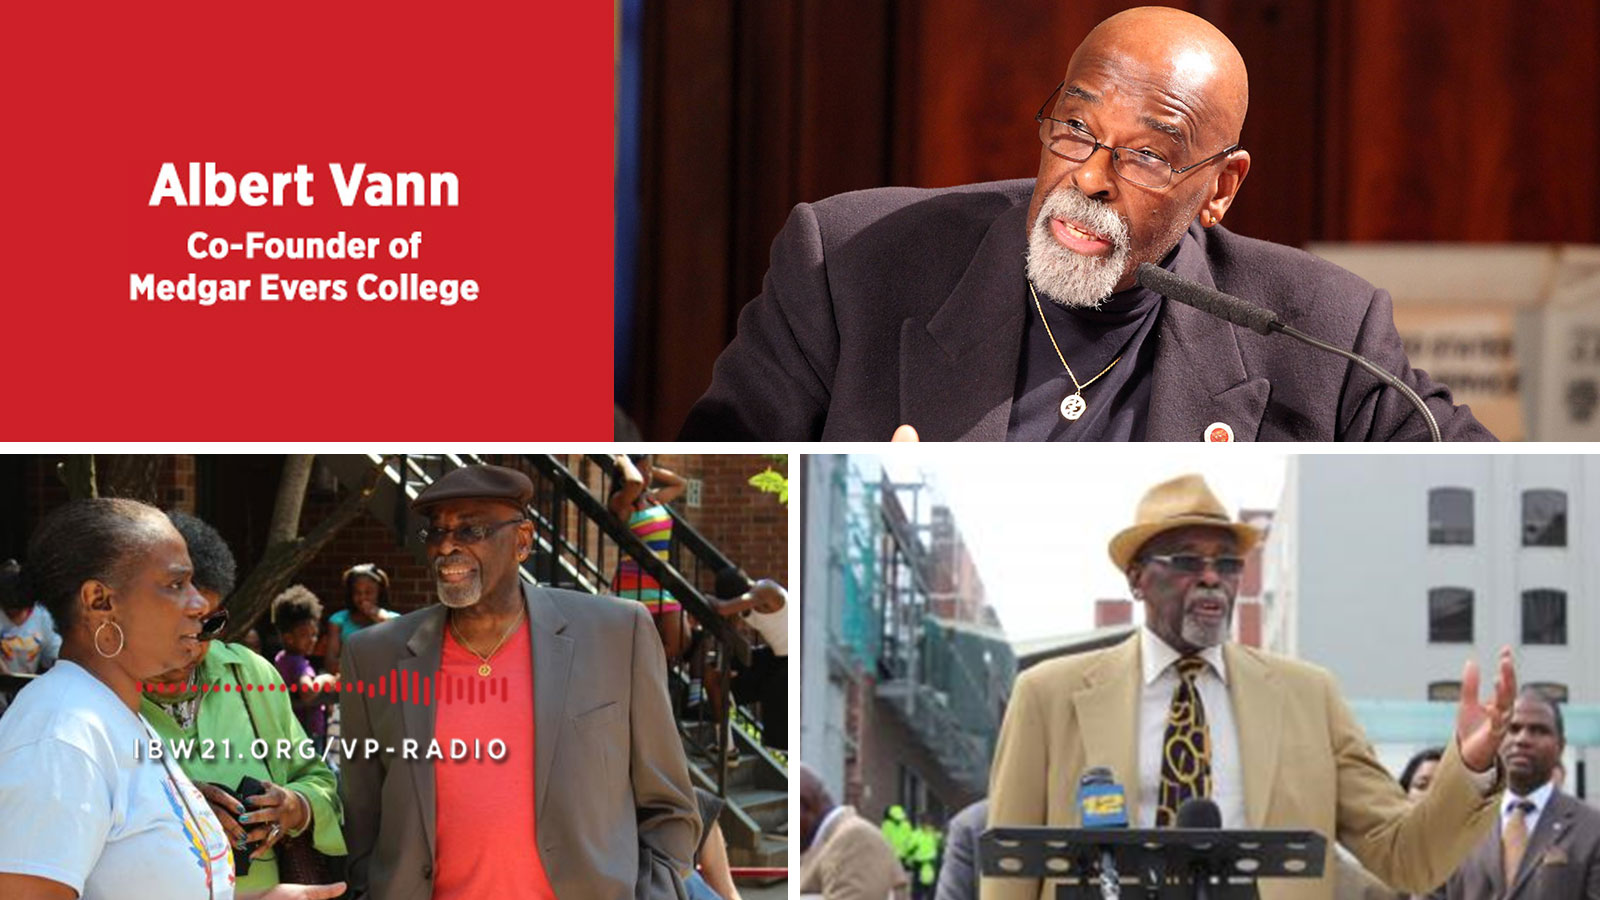 July 25, 2022  — On this edition of Vantage Point, host Dr. Ron Daniels is joined by guests and listeners to reflect on the life and legacy of Al Vann 